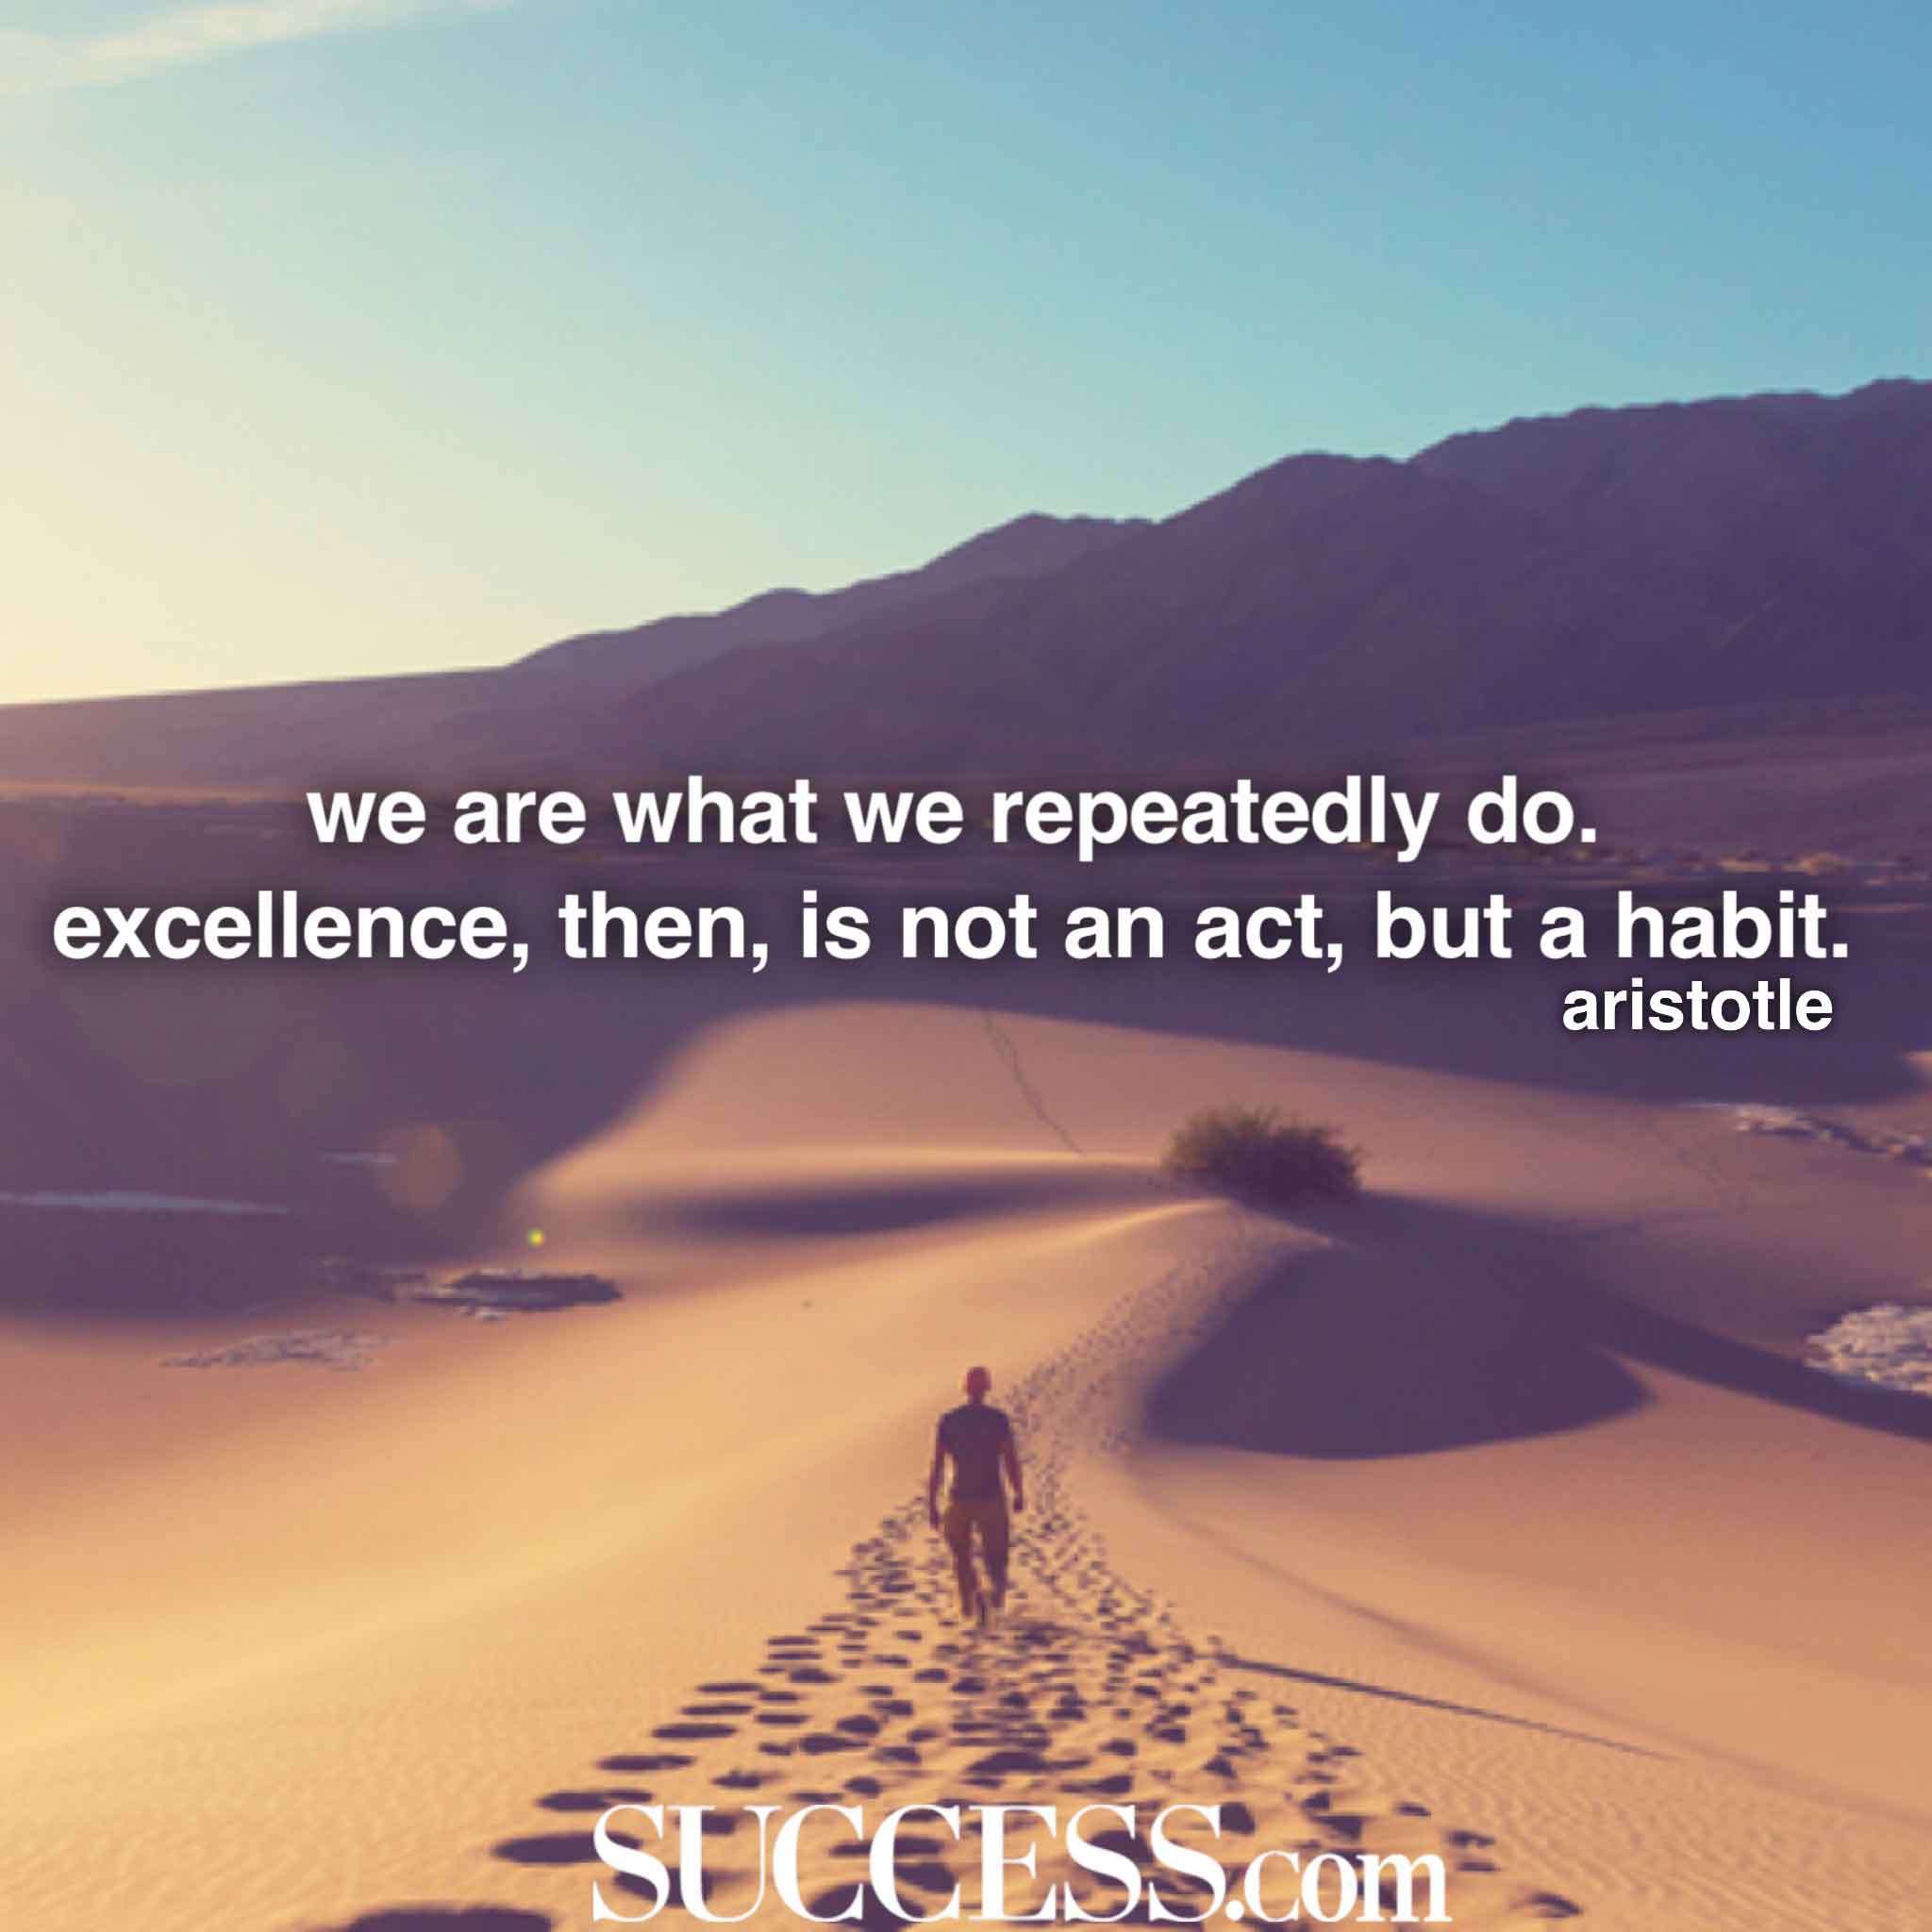 13 Motivational Quotes to Inspire Excellence | SUCCESS